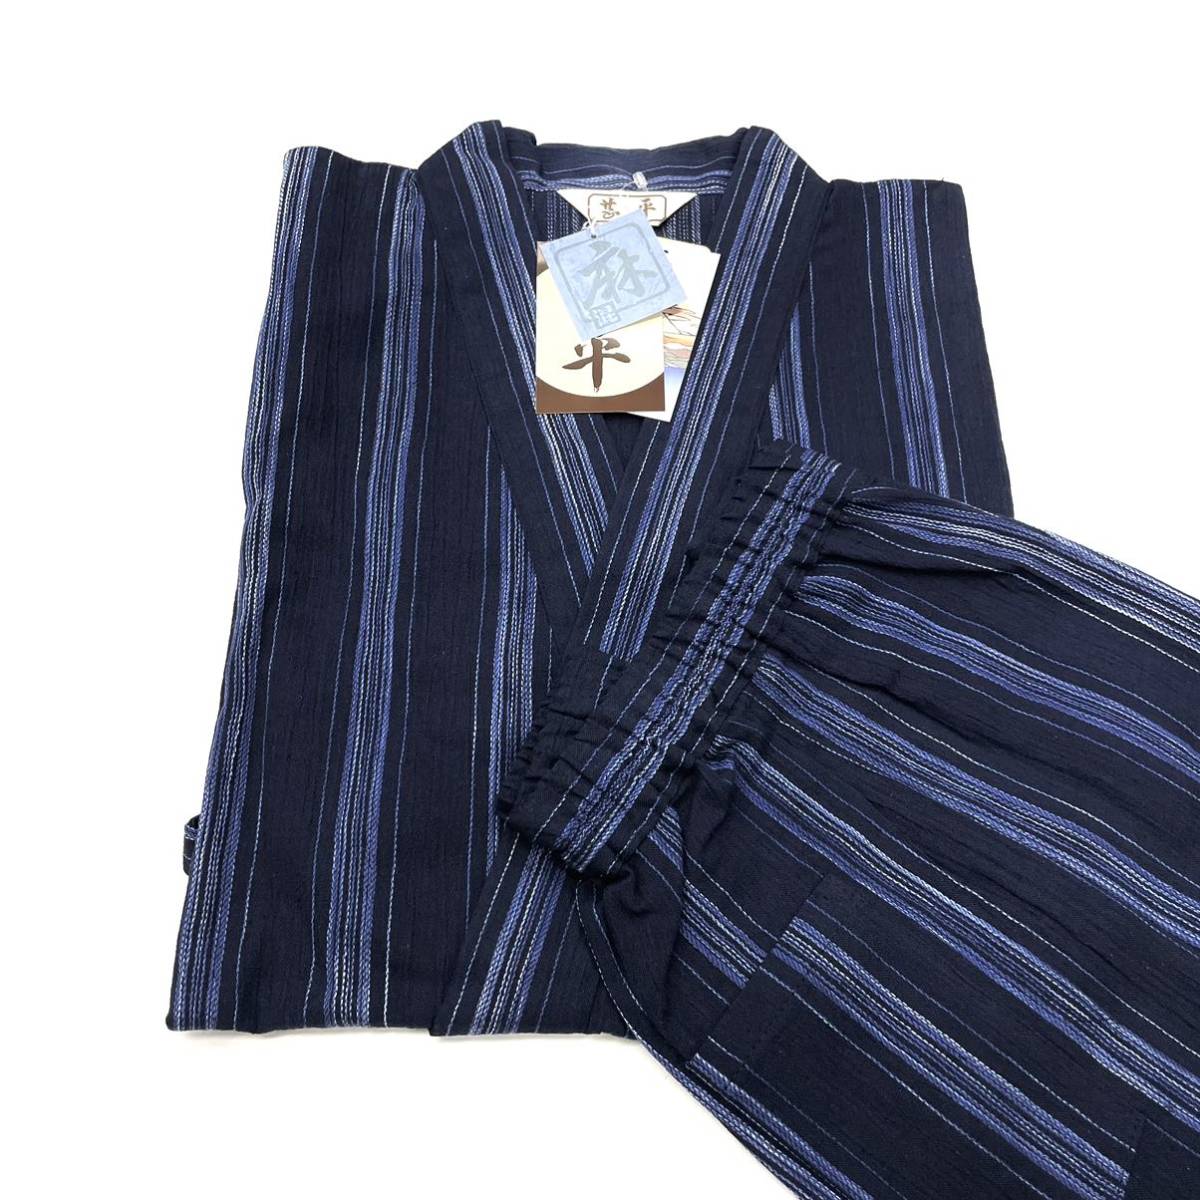  made in Japan man jinbei for adult man for for man jinbei cotton flax cotton flax for summer man man adult domestic production adult jinbei LL size LL 2L size 2L.. navy blue color 